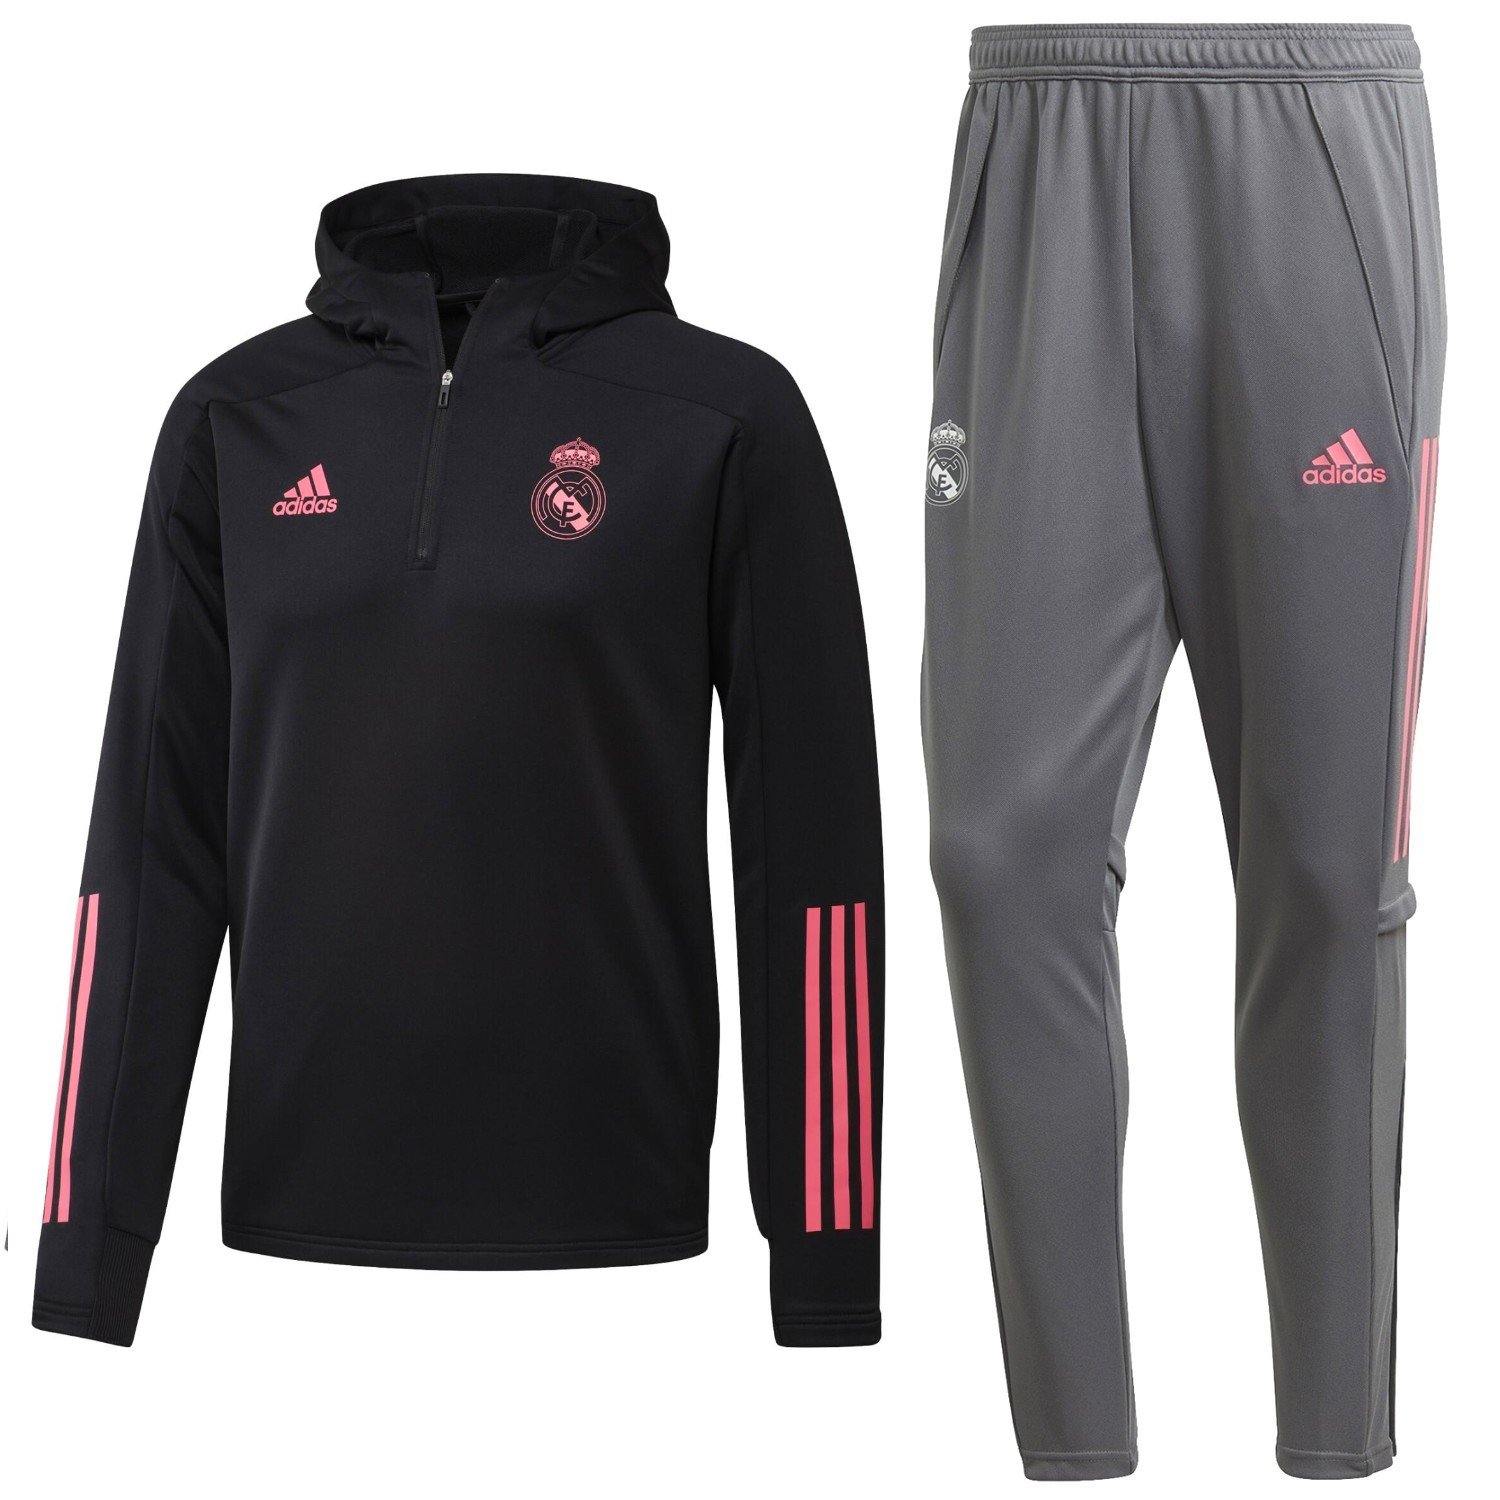 Real Madrid black/grey hooded training technical tracksuit - Adidas – SoccerTracksuits.com